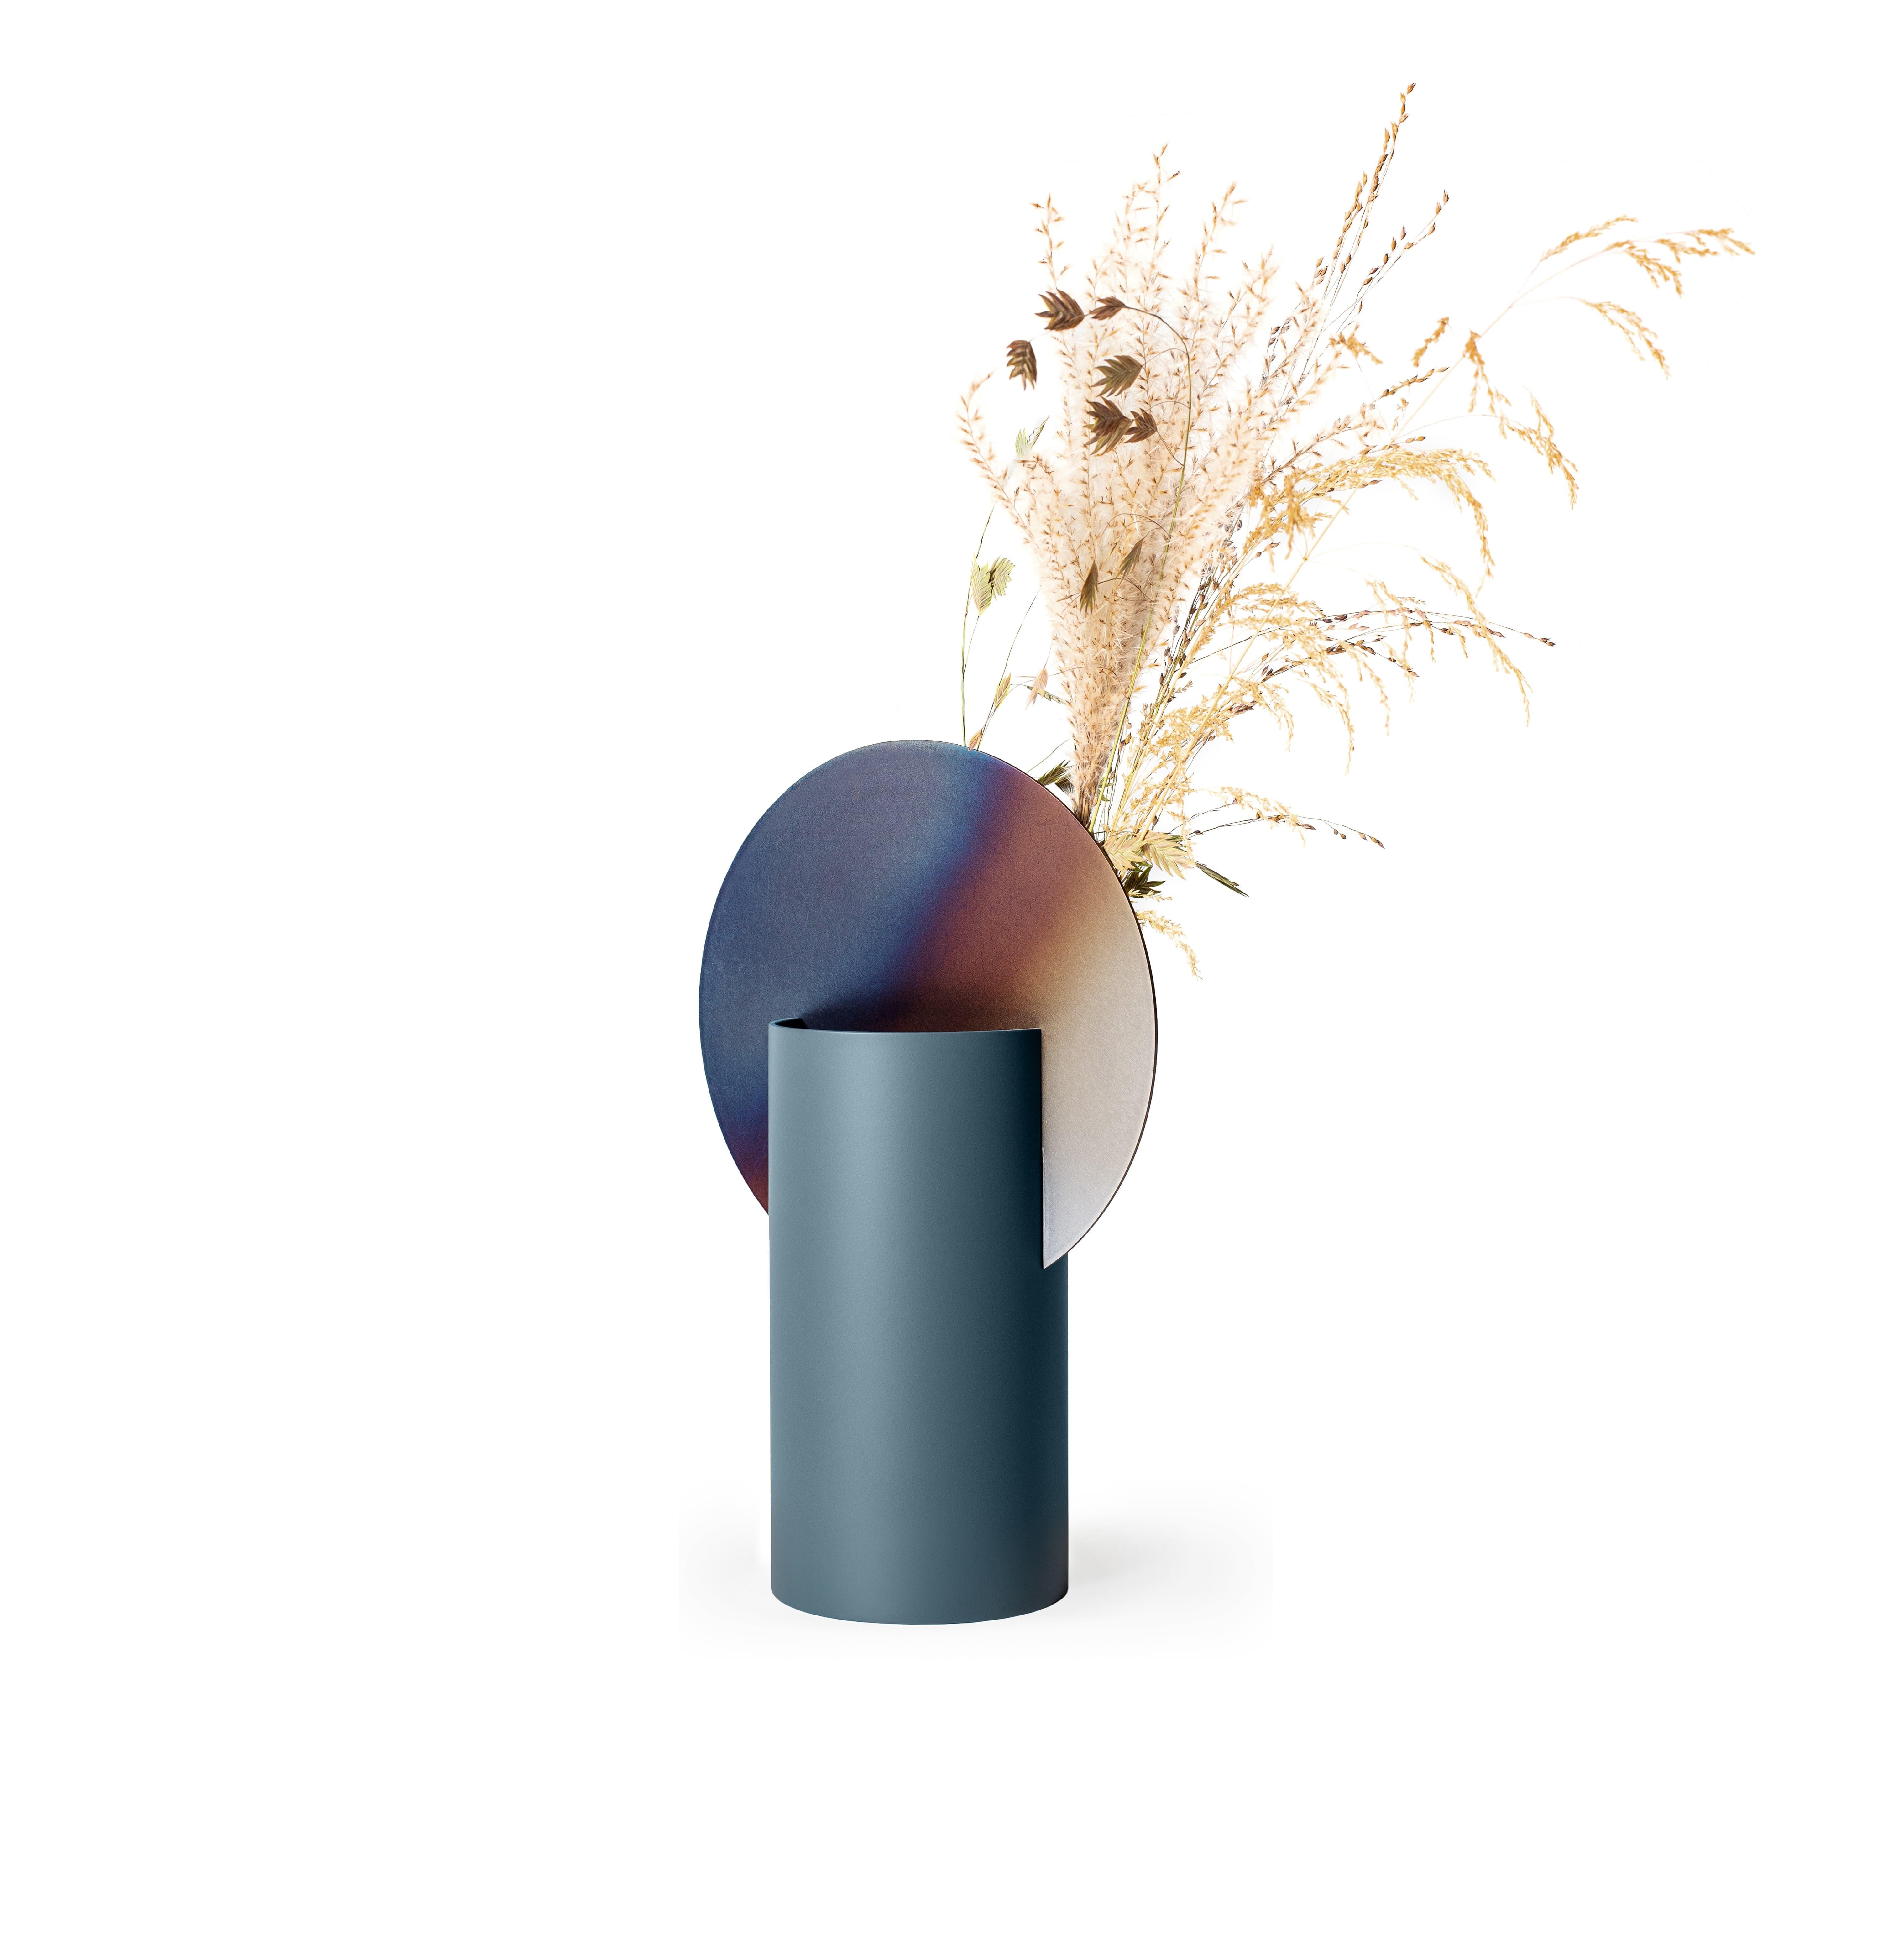 Ukrainian Limited Edition Modern Malevich Vase CSL5 by NOOM with Burned Steel